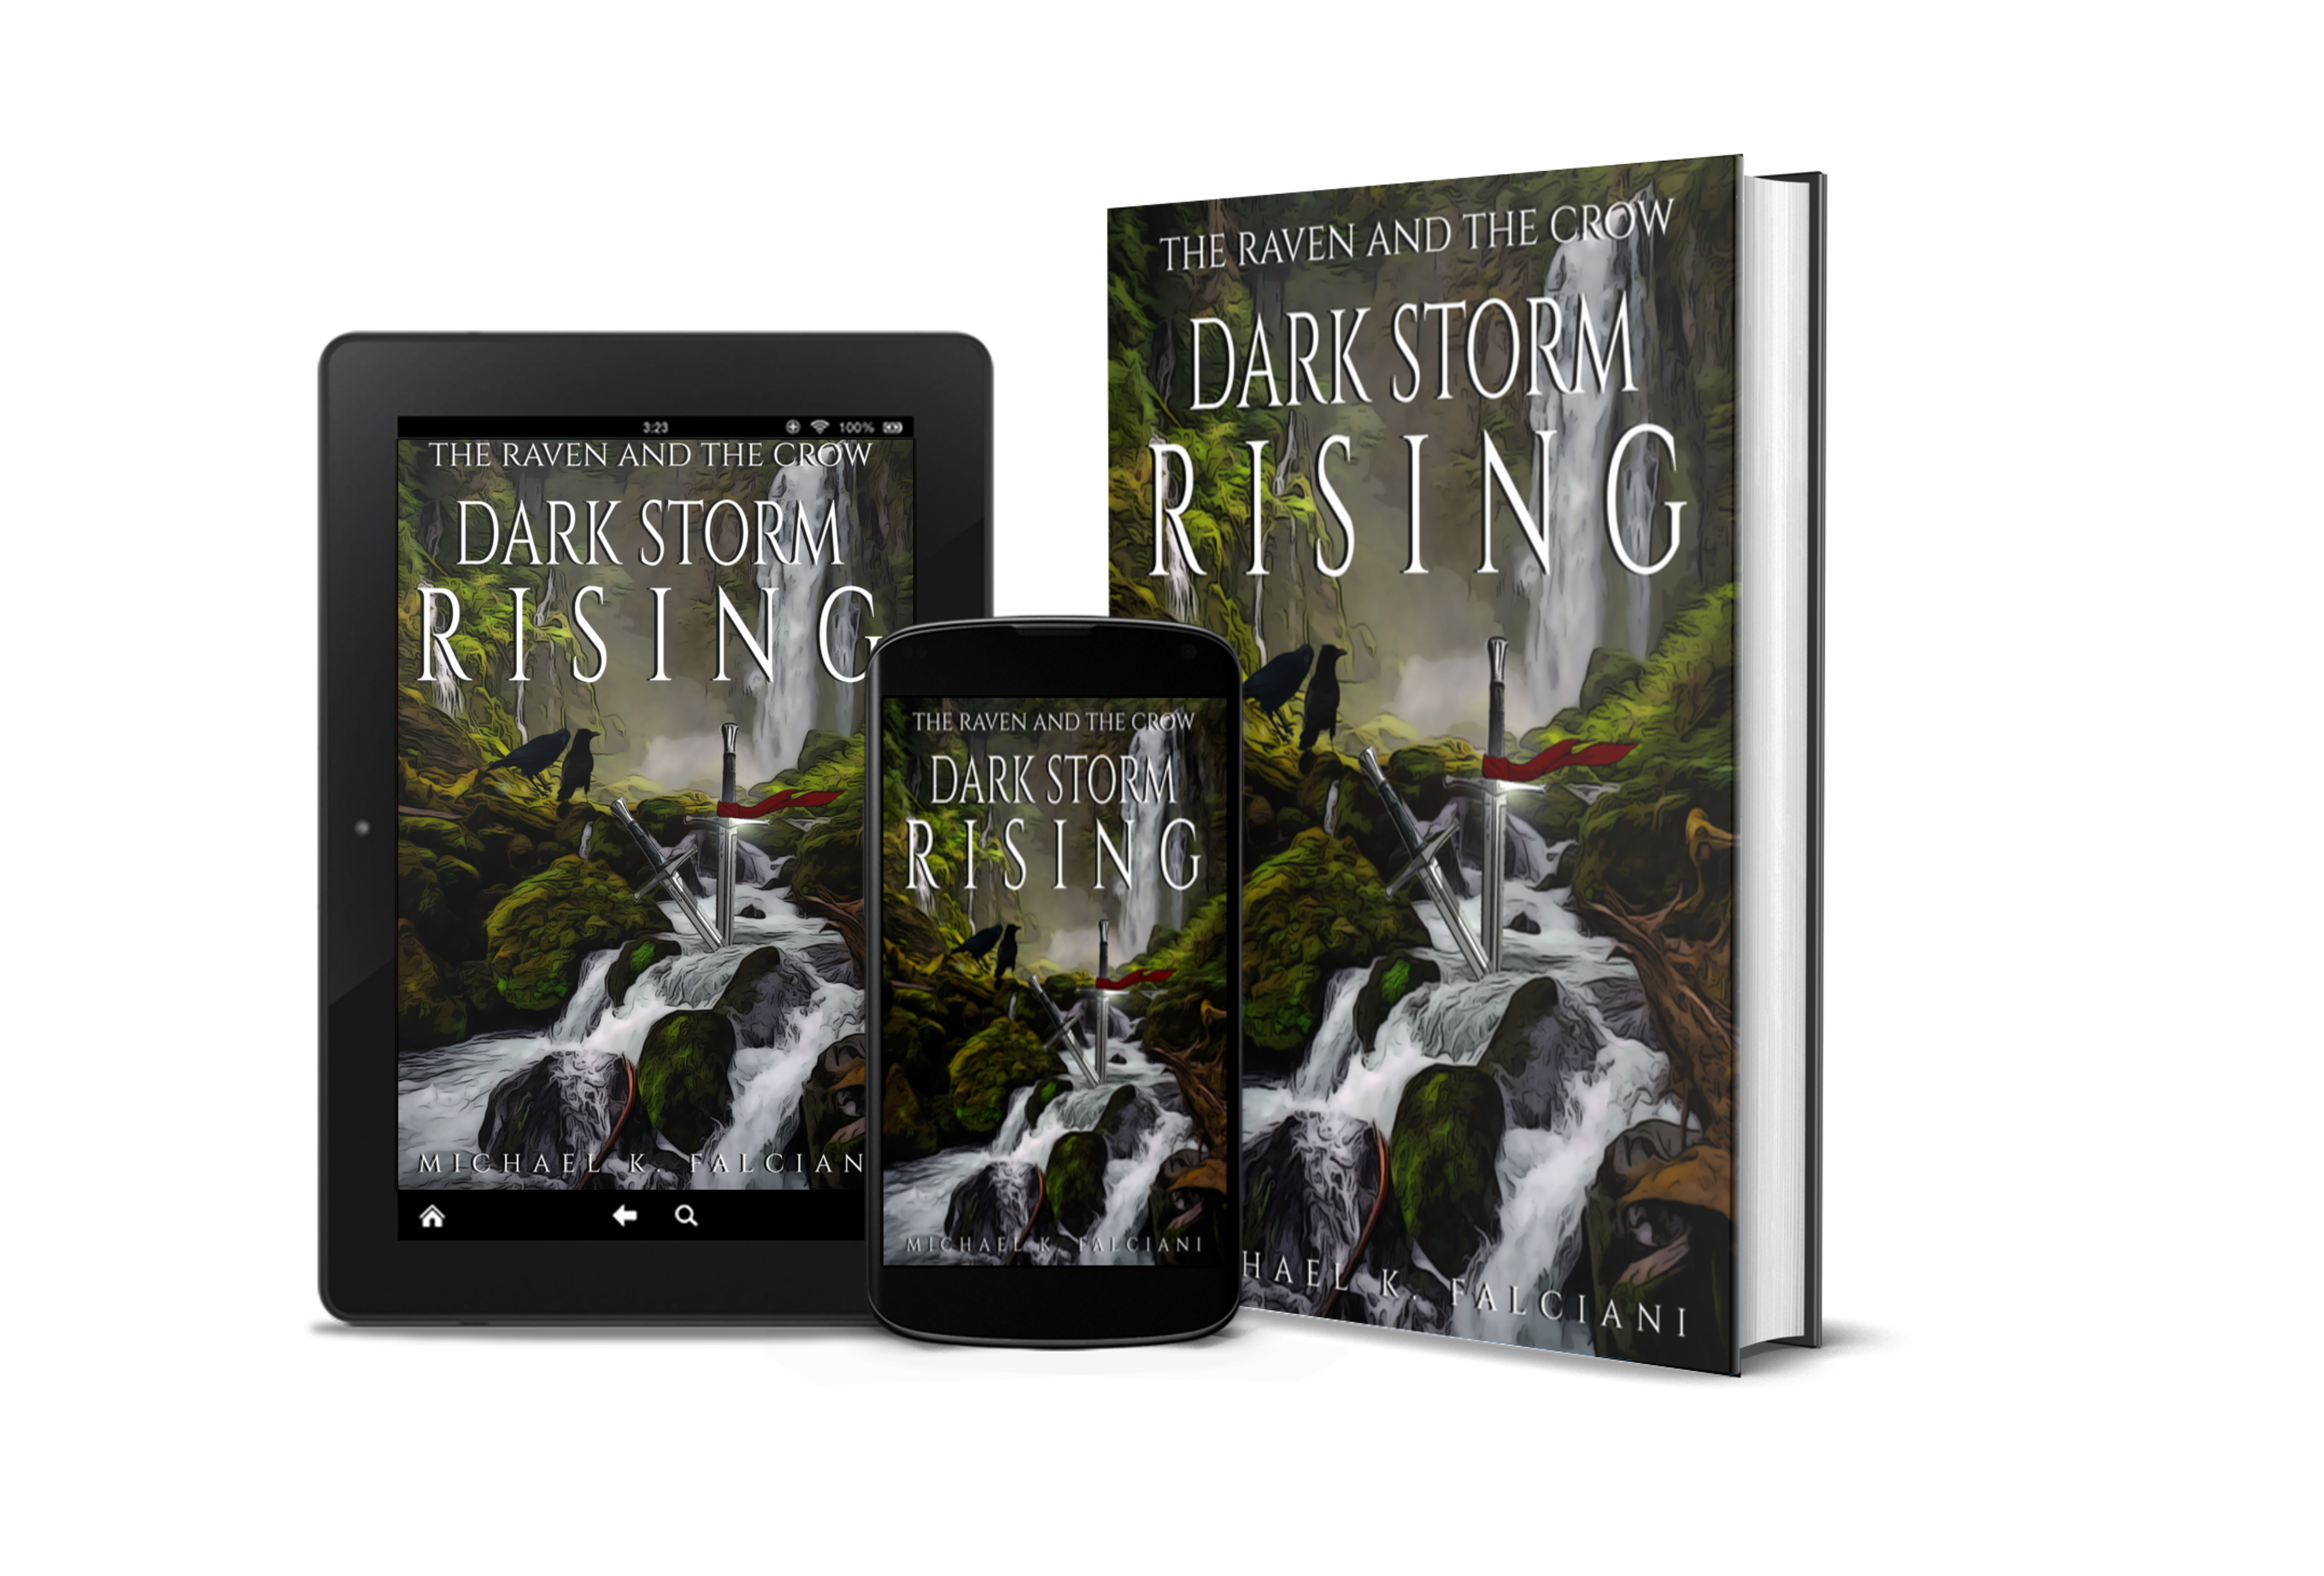 If you haven’t gotten your copy of “The Raven and the Crow: Dark Storm Rising”, you’d better hurry! Why? Because book two of “The Raven and the Crow” series, “The Gray Throne” is in the editing queue.